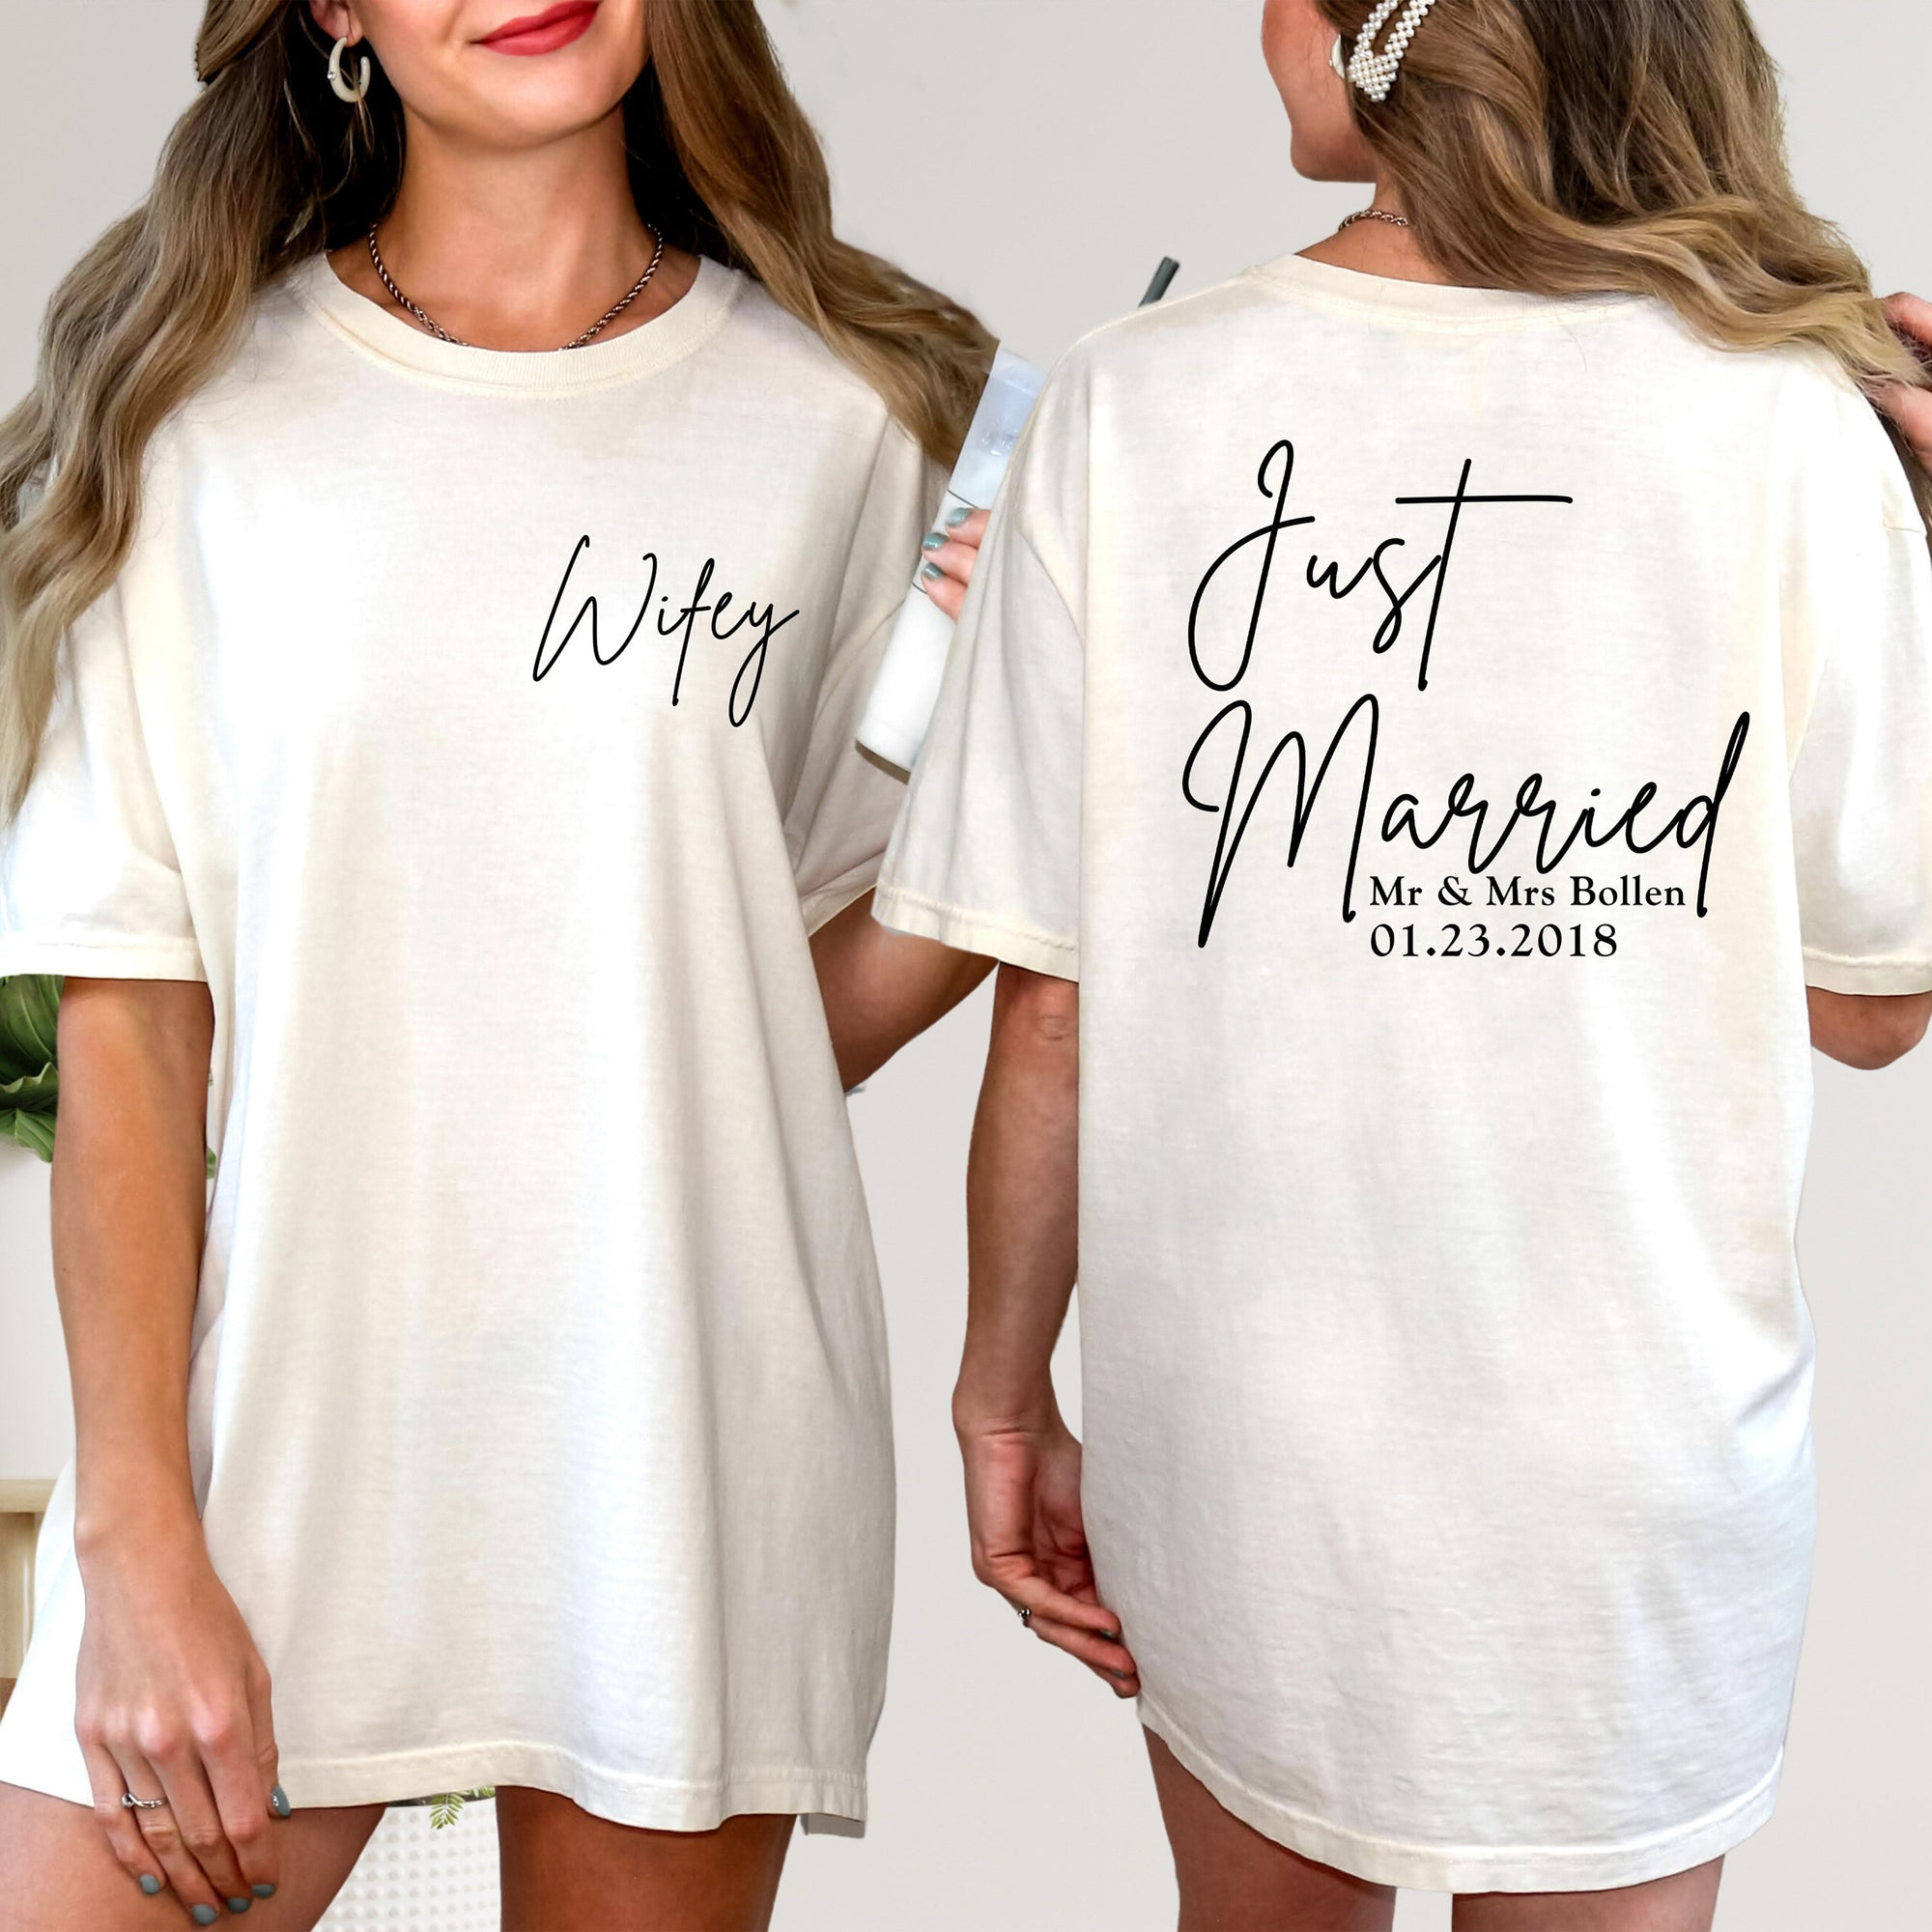 Hubby Wifey Just Married - Personalized Shirt - Gift For Couple